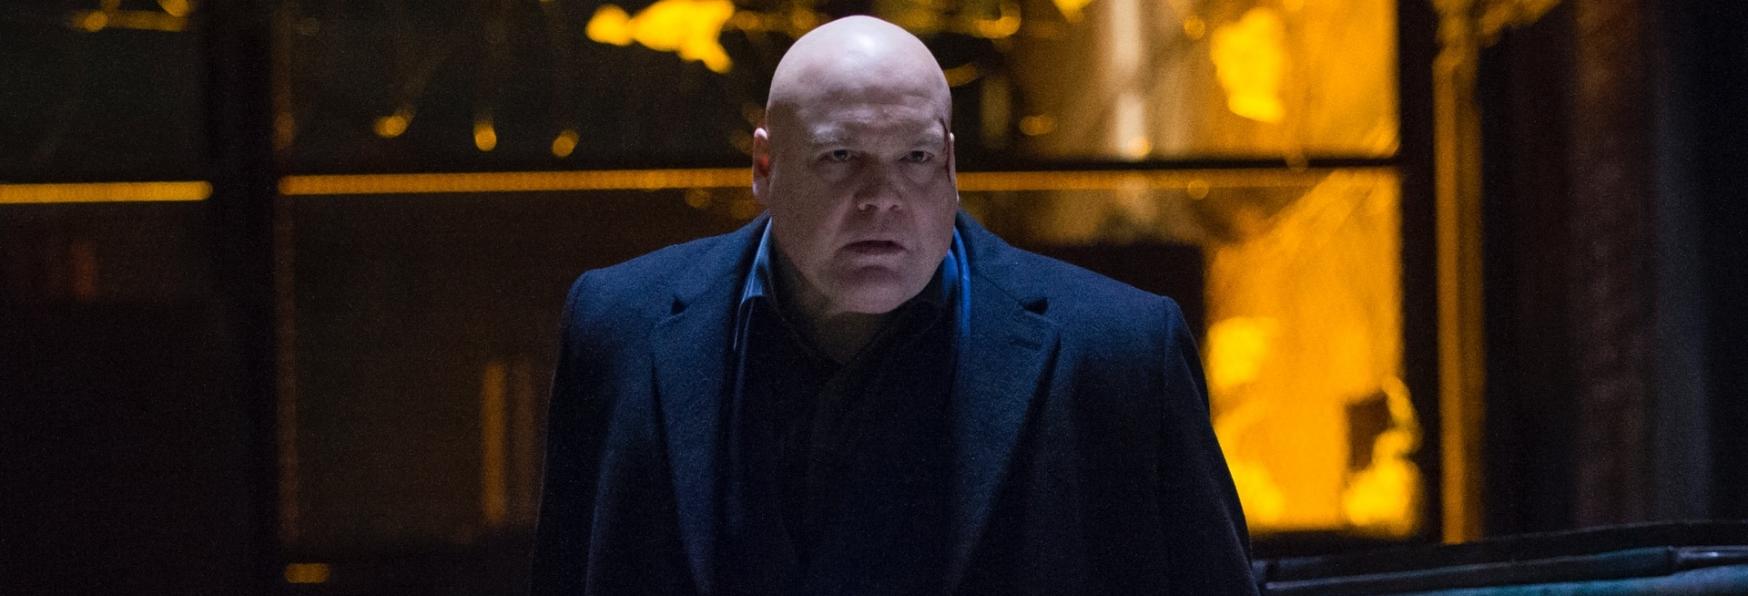 Daredevil: Born Again - Vincent D'Onofrio teases the Return of Fisk